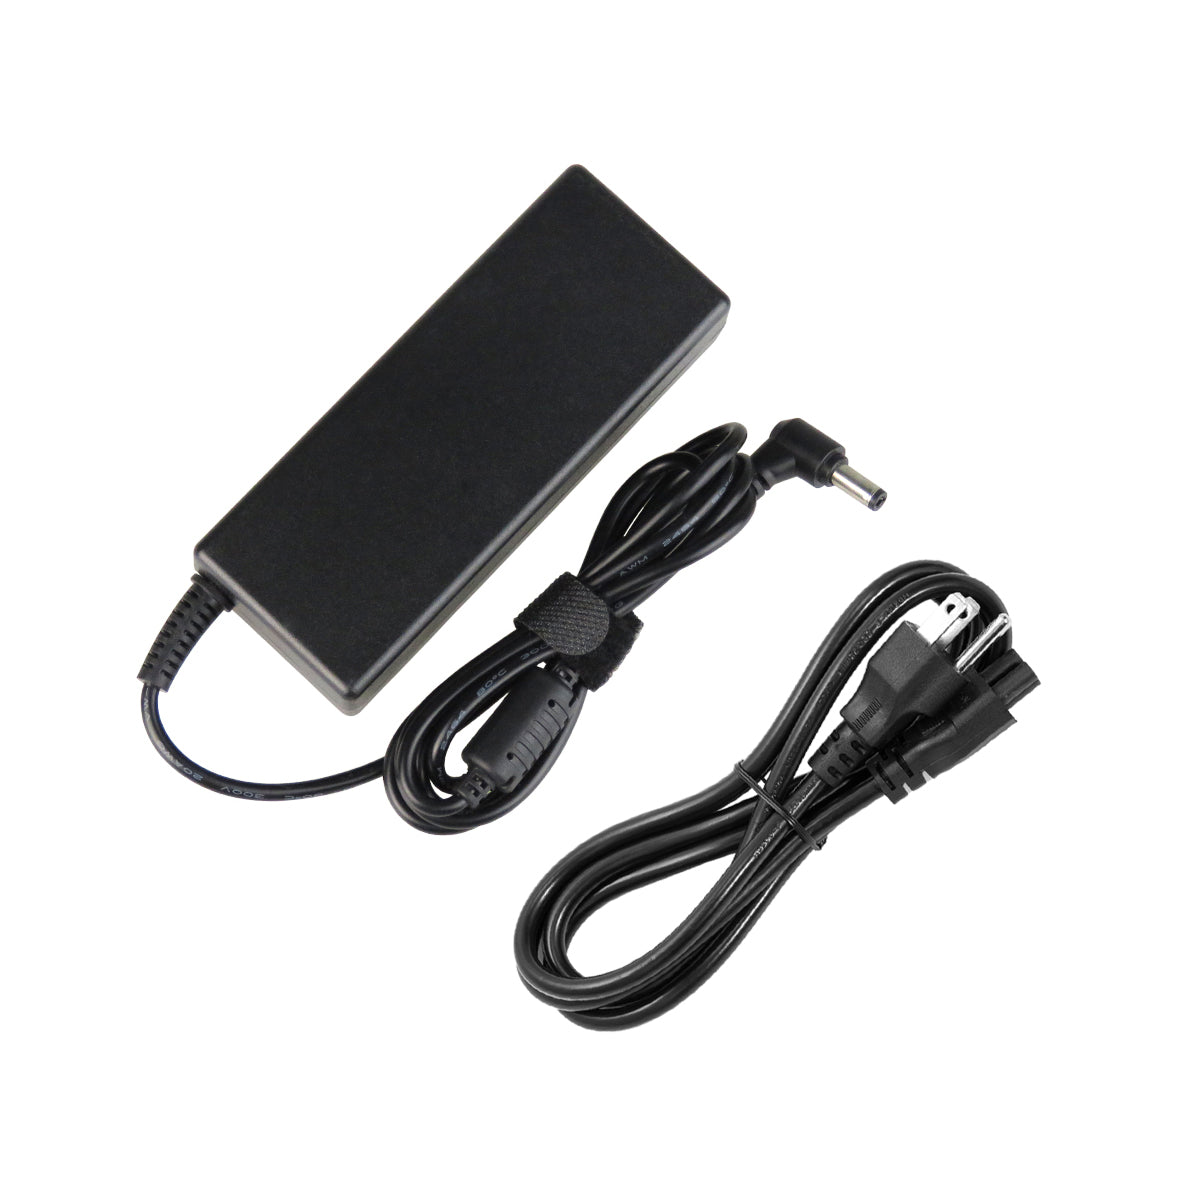 AC Adapter Charger for ASUS N53SV-B1 Notebook.